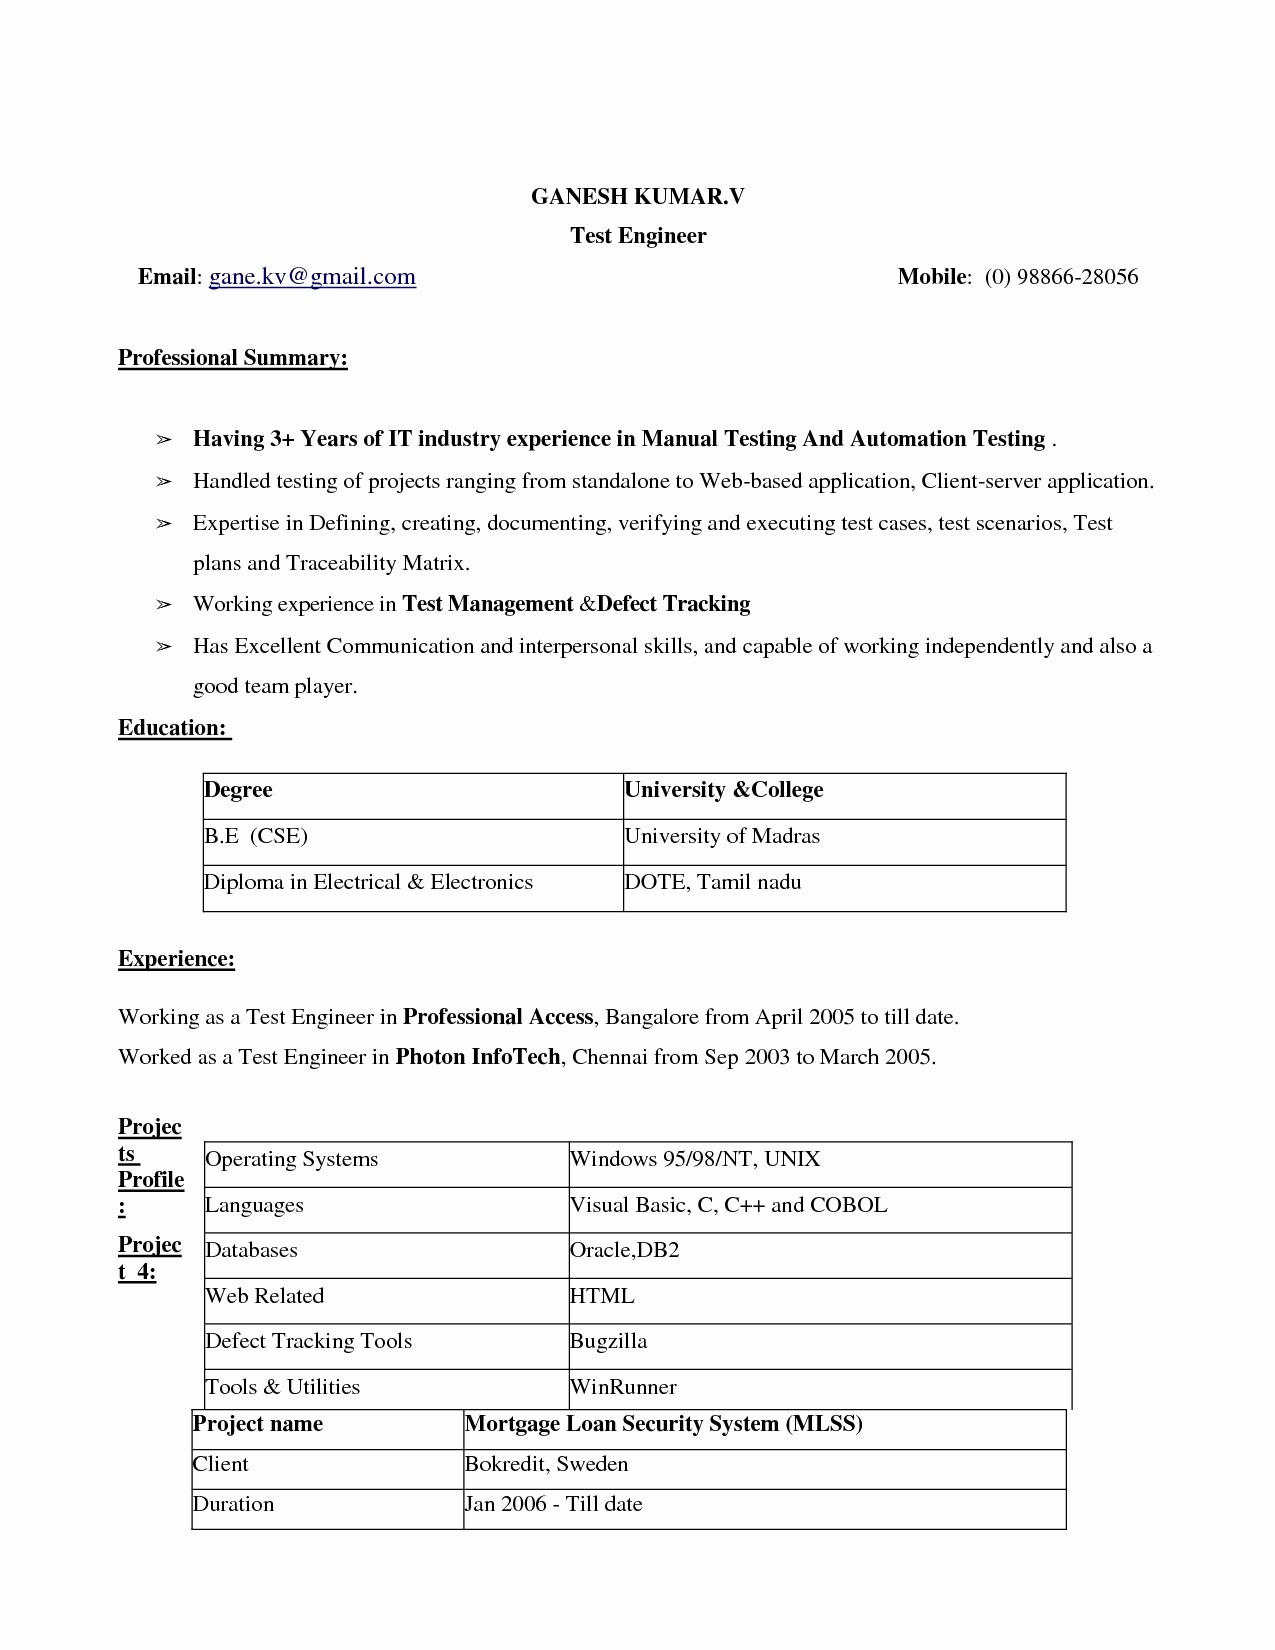 Ms Office Word Resume Templates New Resume Template Microsoft Word 2017